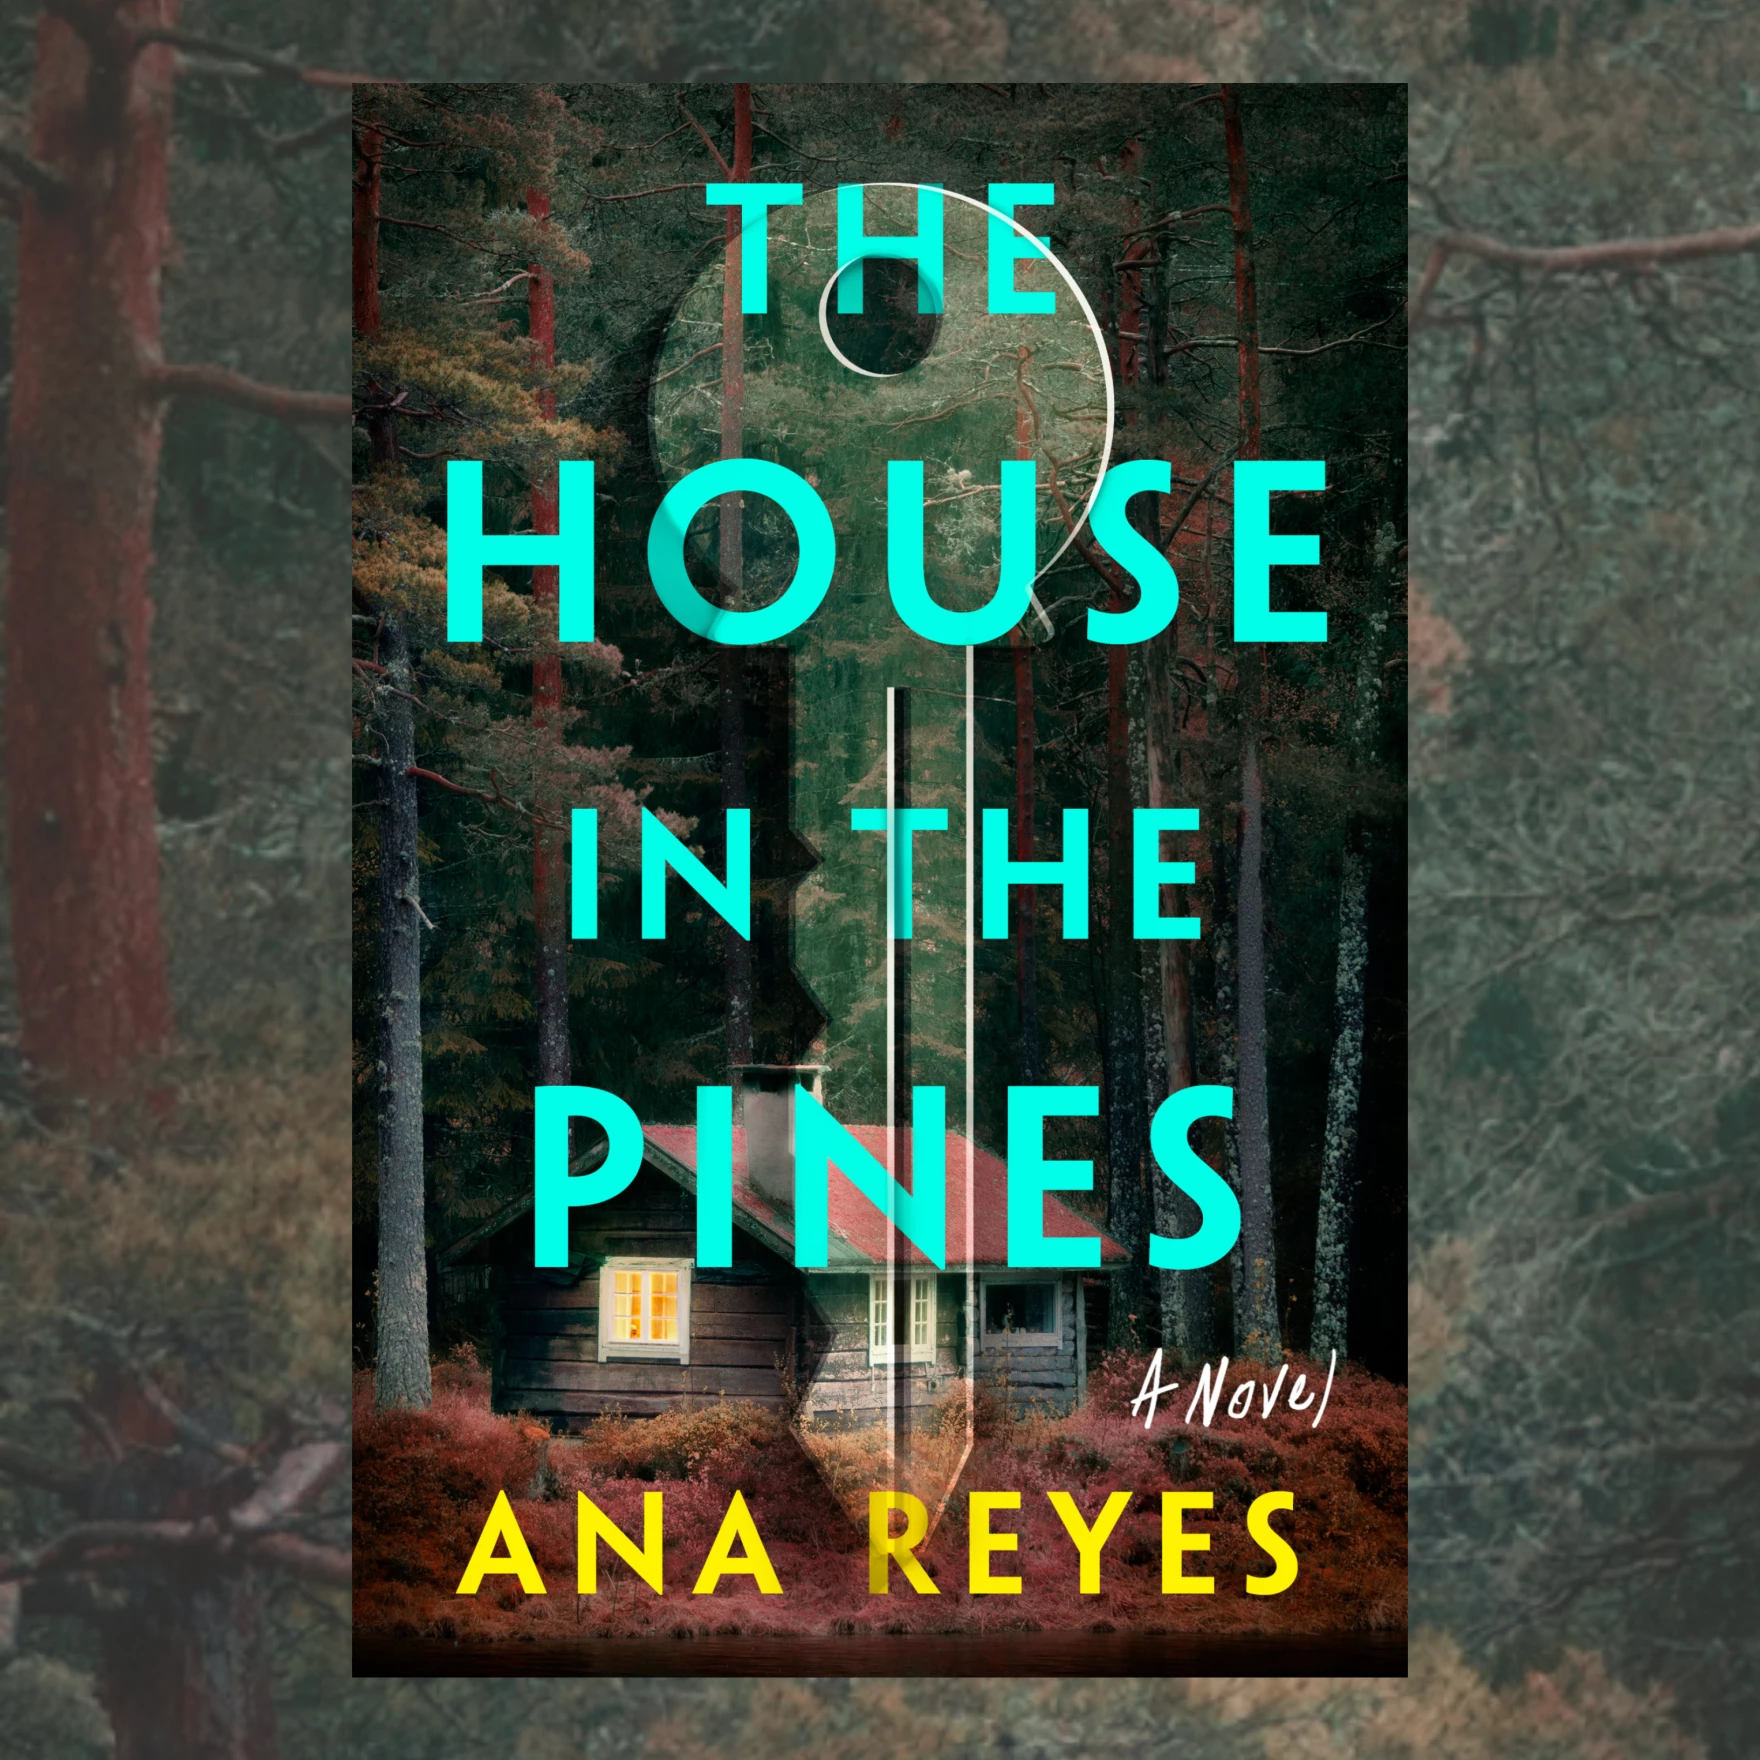 The Book Show - Ana Reyes - The House in the Pines